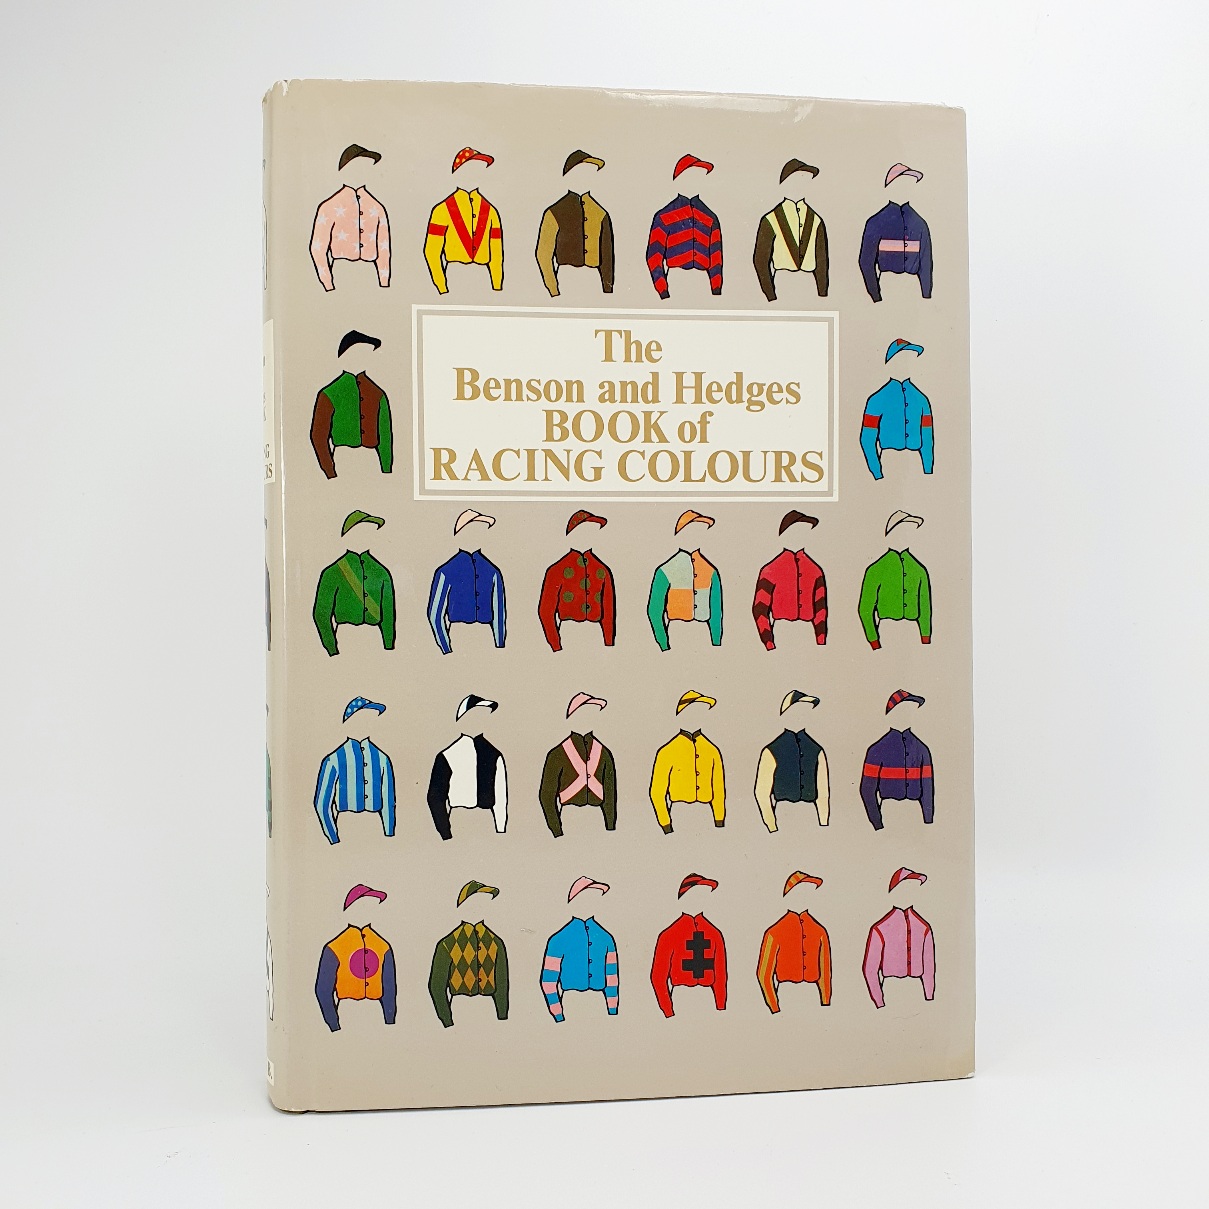 The Benson and Hedges Book of Racing Colours